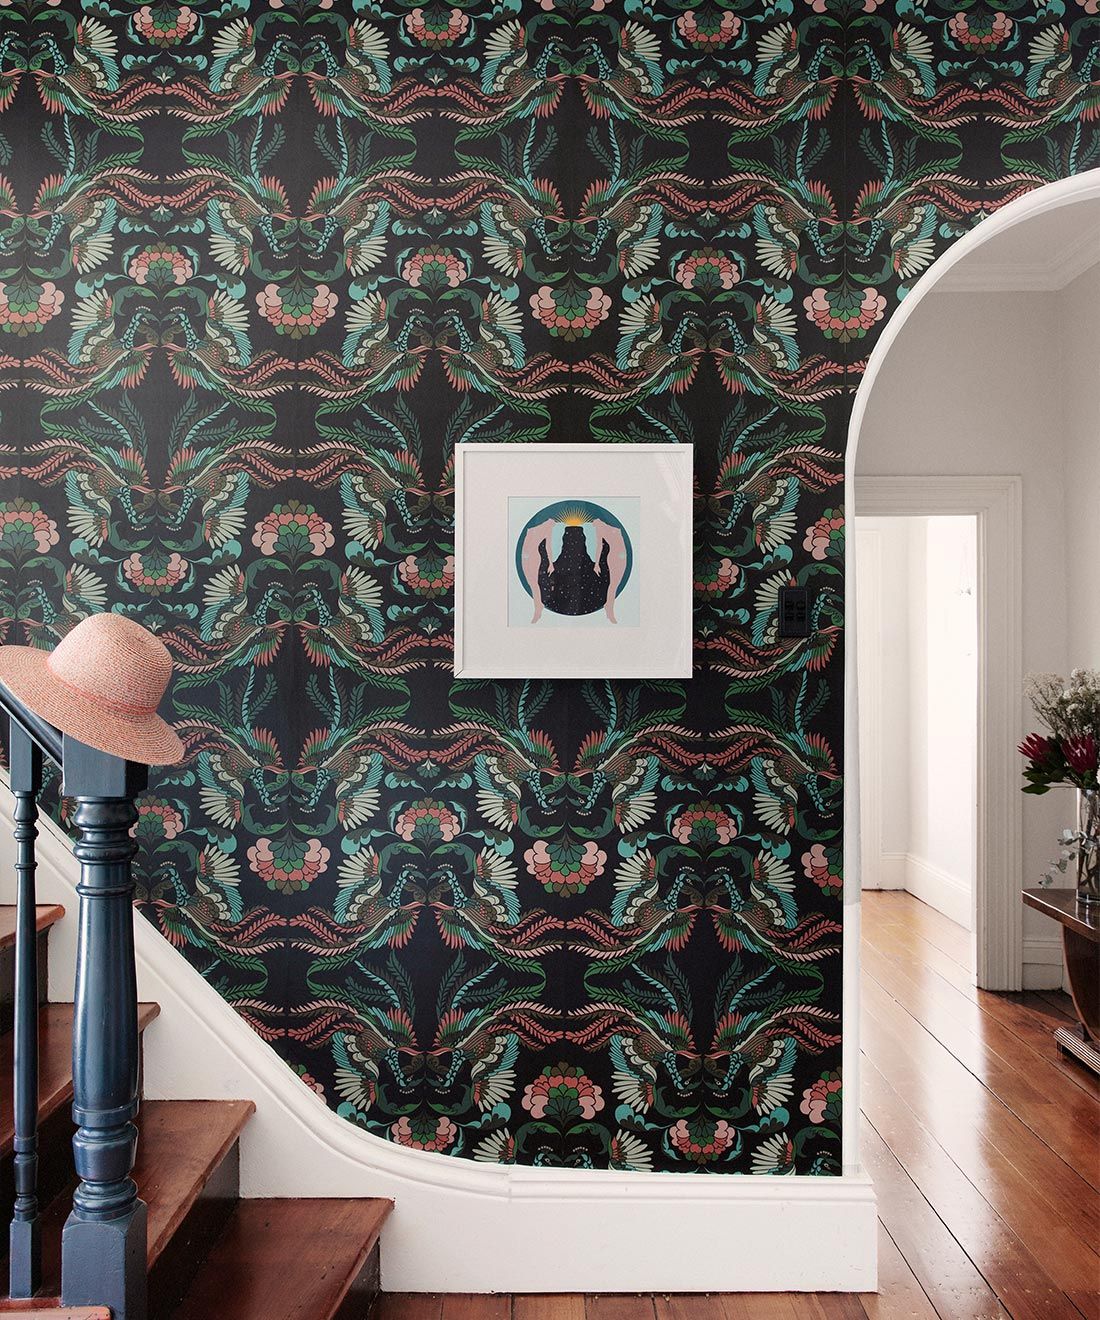 Prancing Peacocks Wallpaper • Fiesta • Insitu with stairs and hat on banister